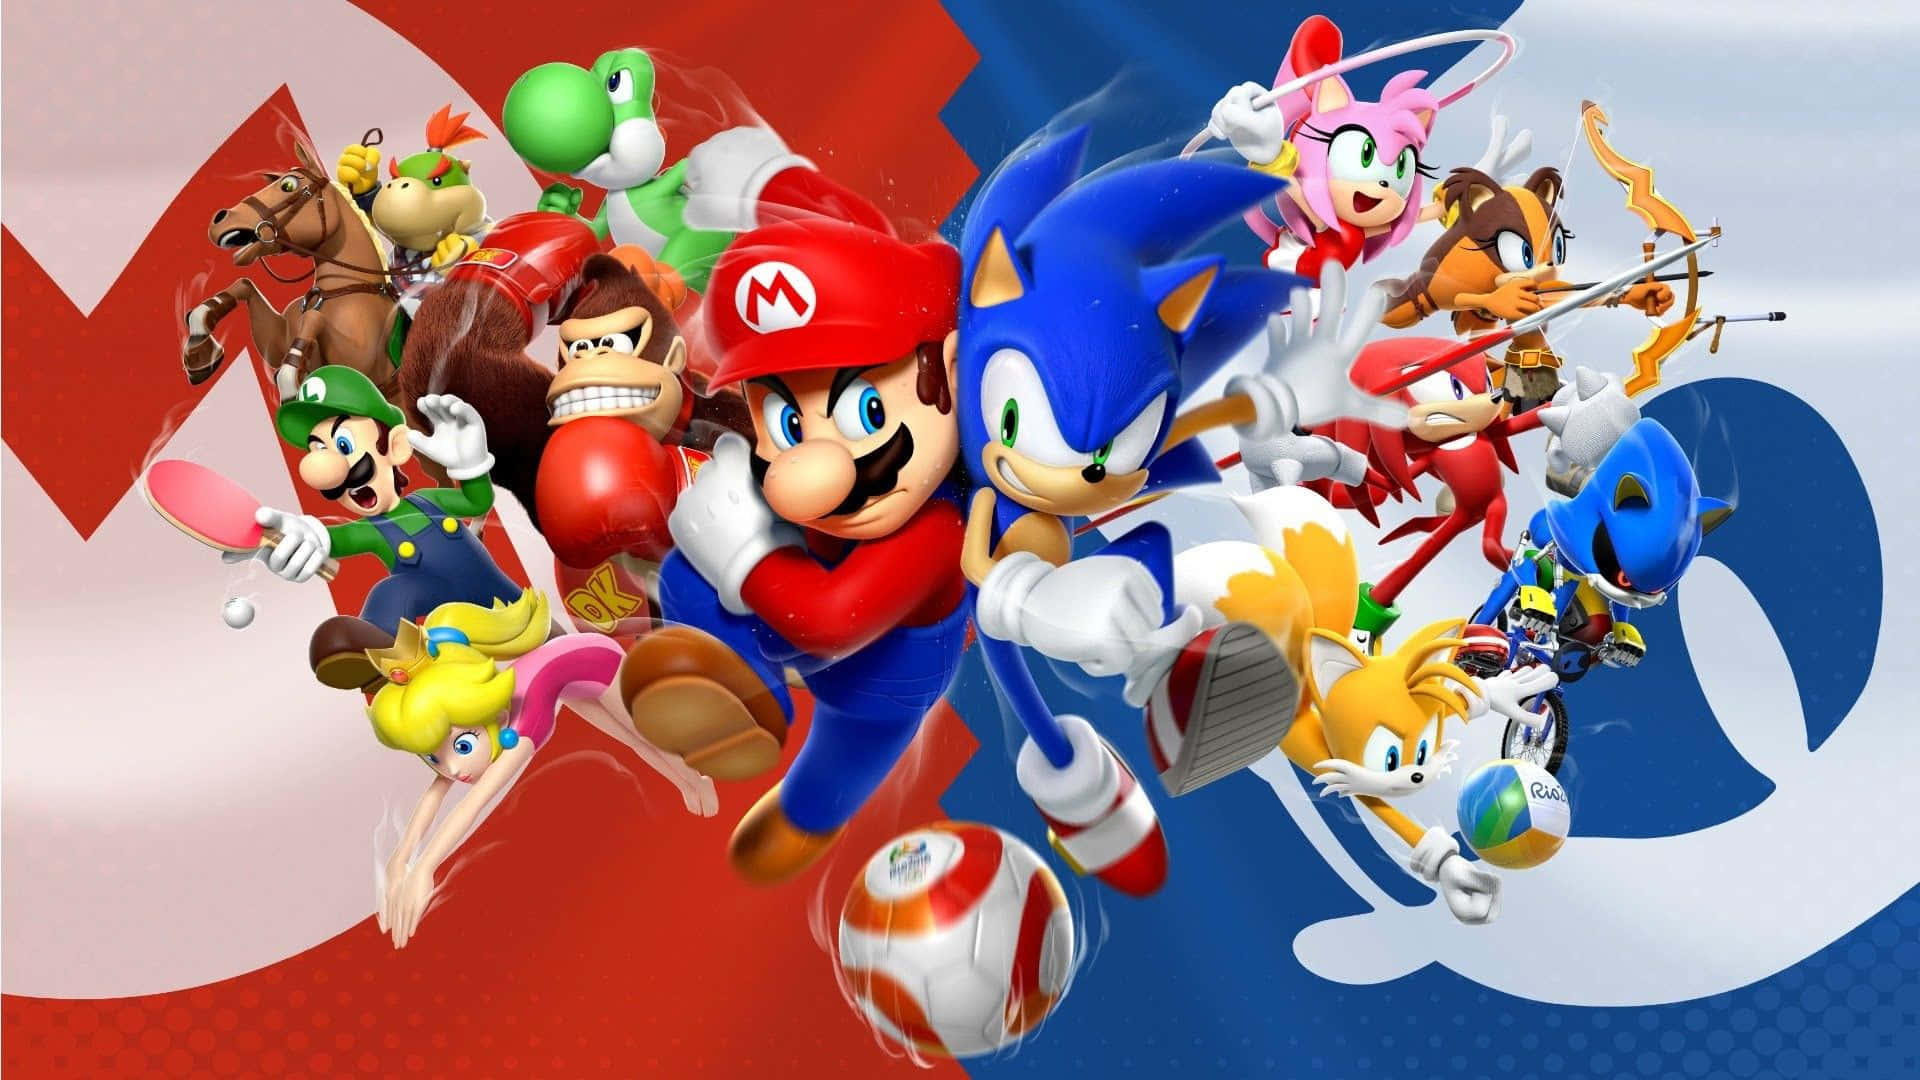 Mario And Sonic At The Olympic Games Wallpaper